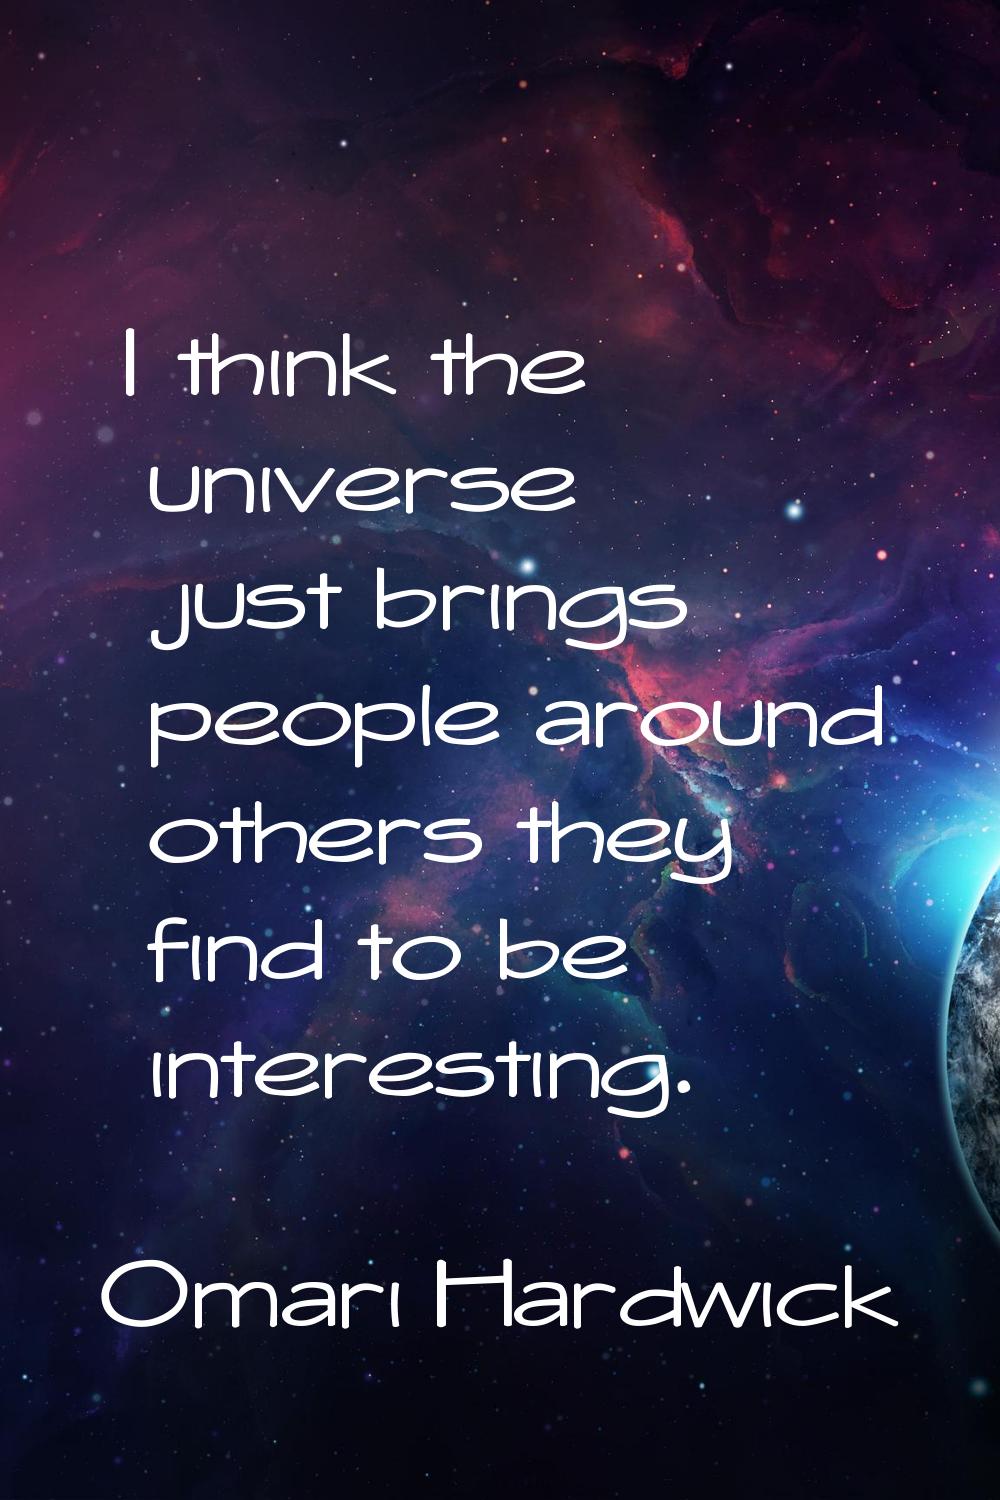 I think the universe just brings people around others they find to be interesting.